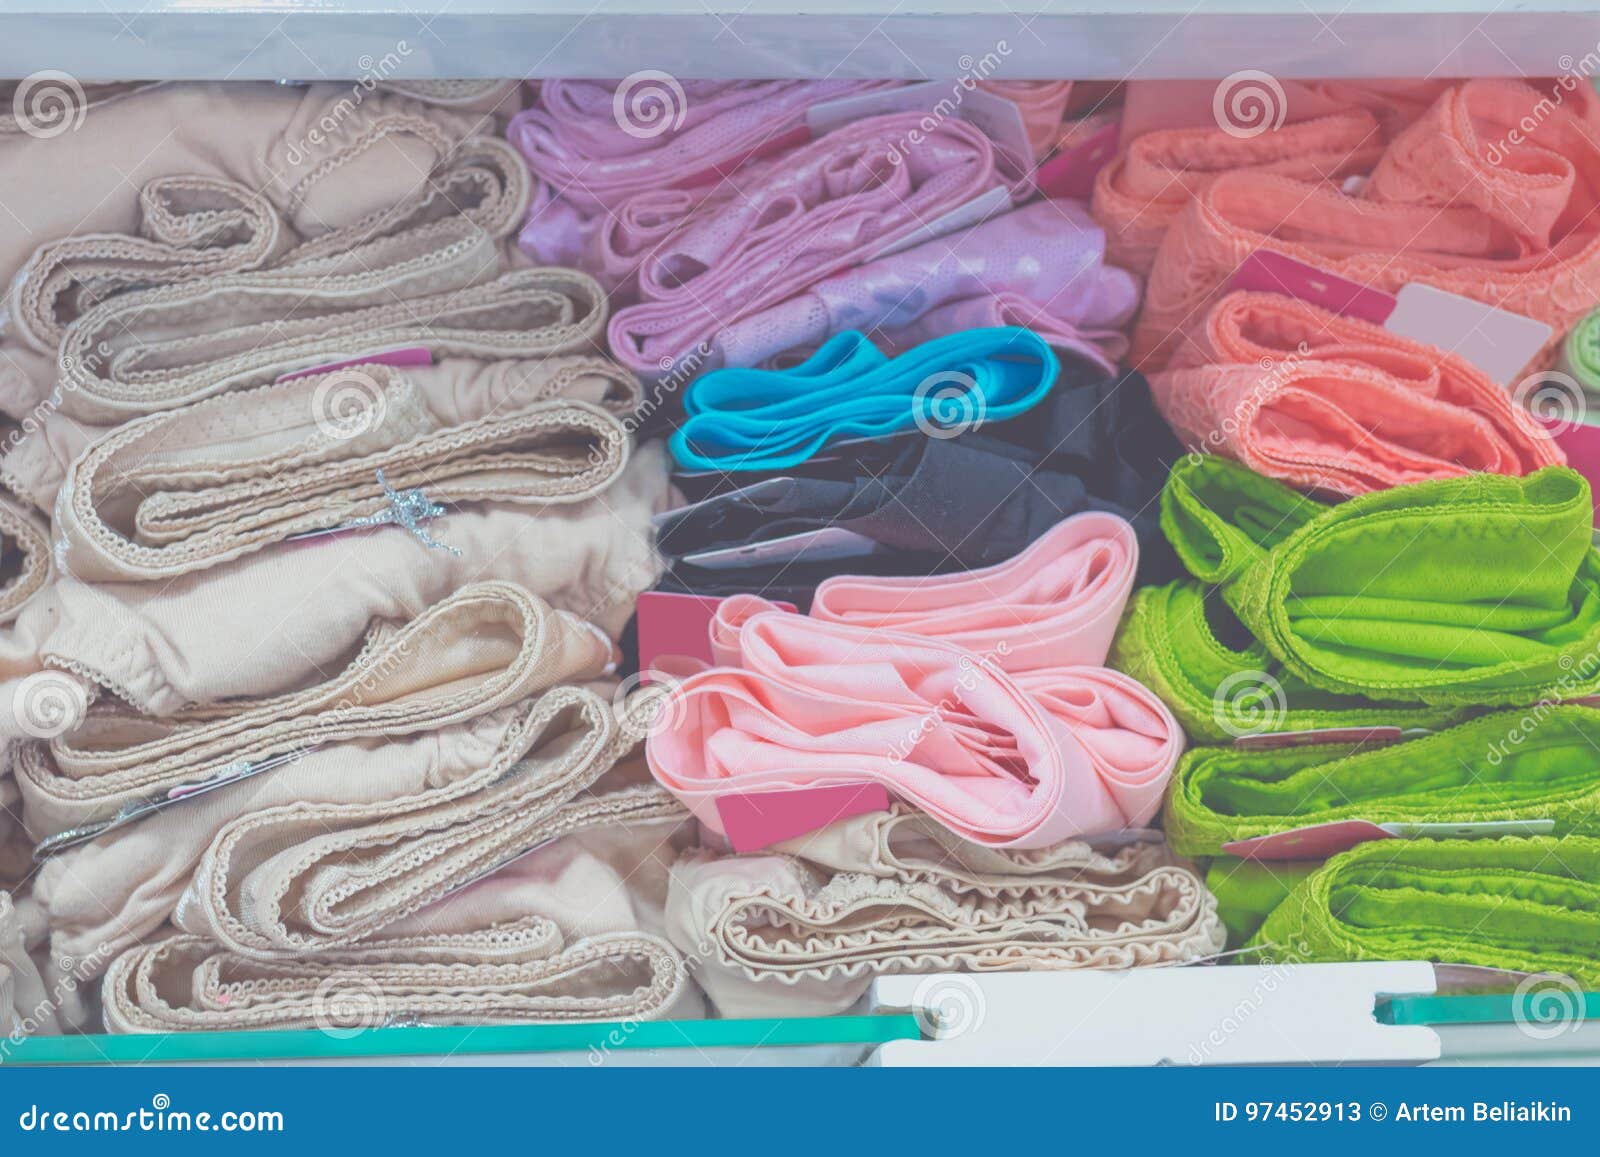 https://thumbs.dreamstime.com/z/boutique-sale-women-underwear-clothes-big-shopping-mall-bali-island-indonesia-97452913.jpg